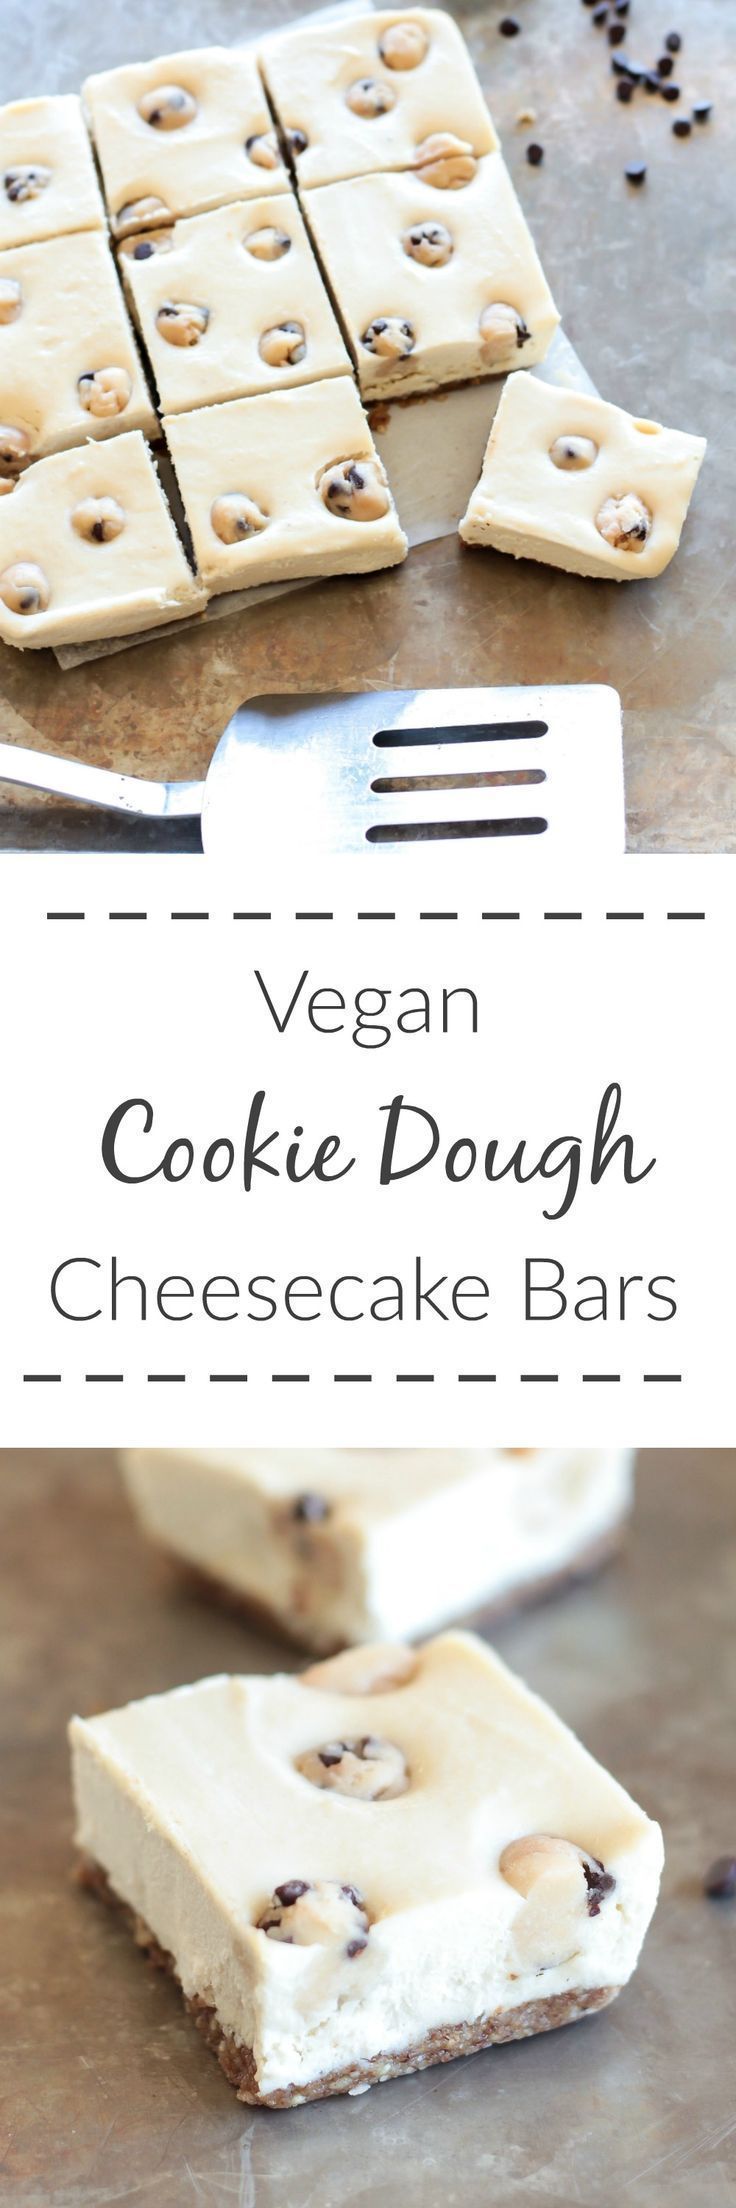 Vegan Cookie Dough Cheesecake Bars have a silky smooth cheesecake filling studded with chocolate chip cookie dough bites- they are